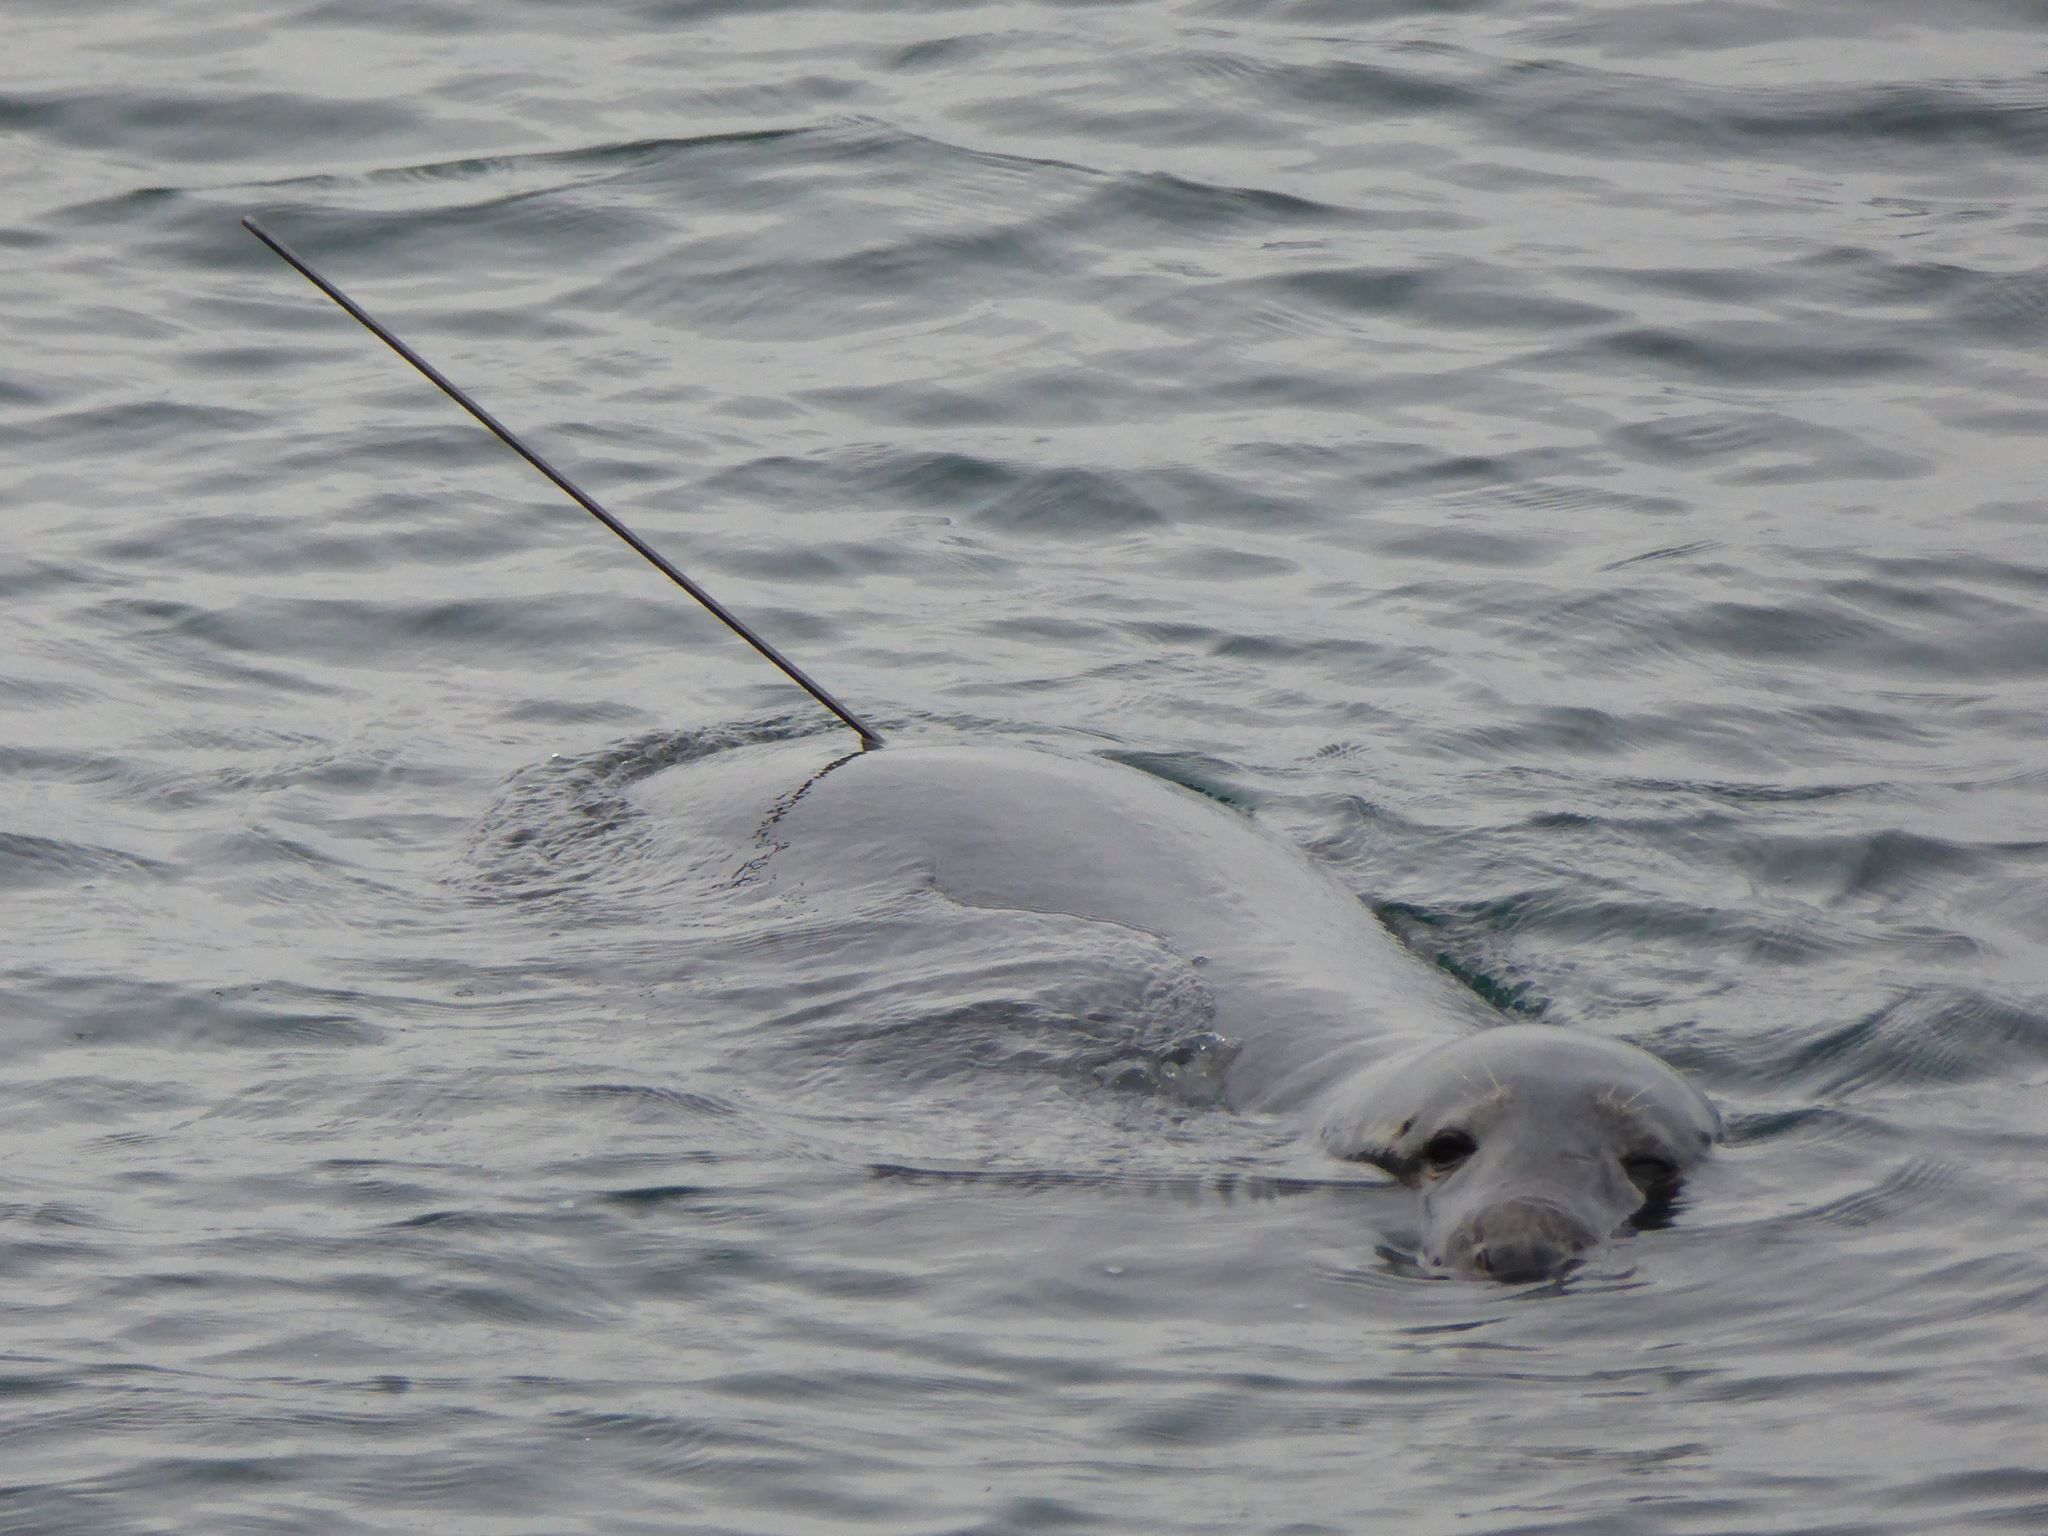 The grey seal has a 2ft long spear or crossbow bolt protruding from it